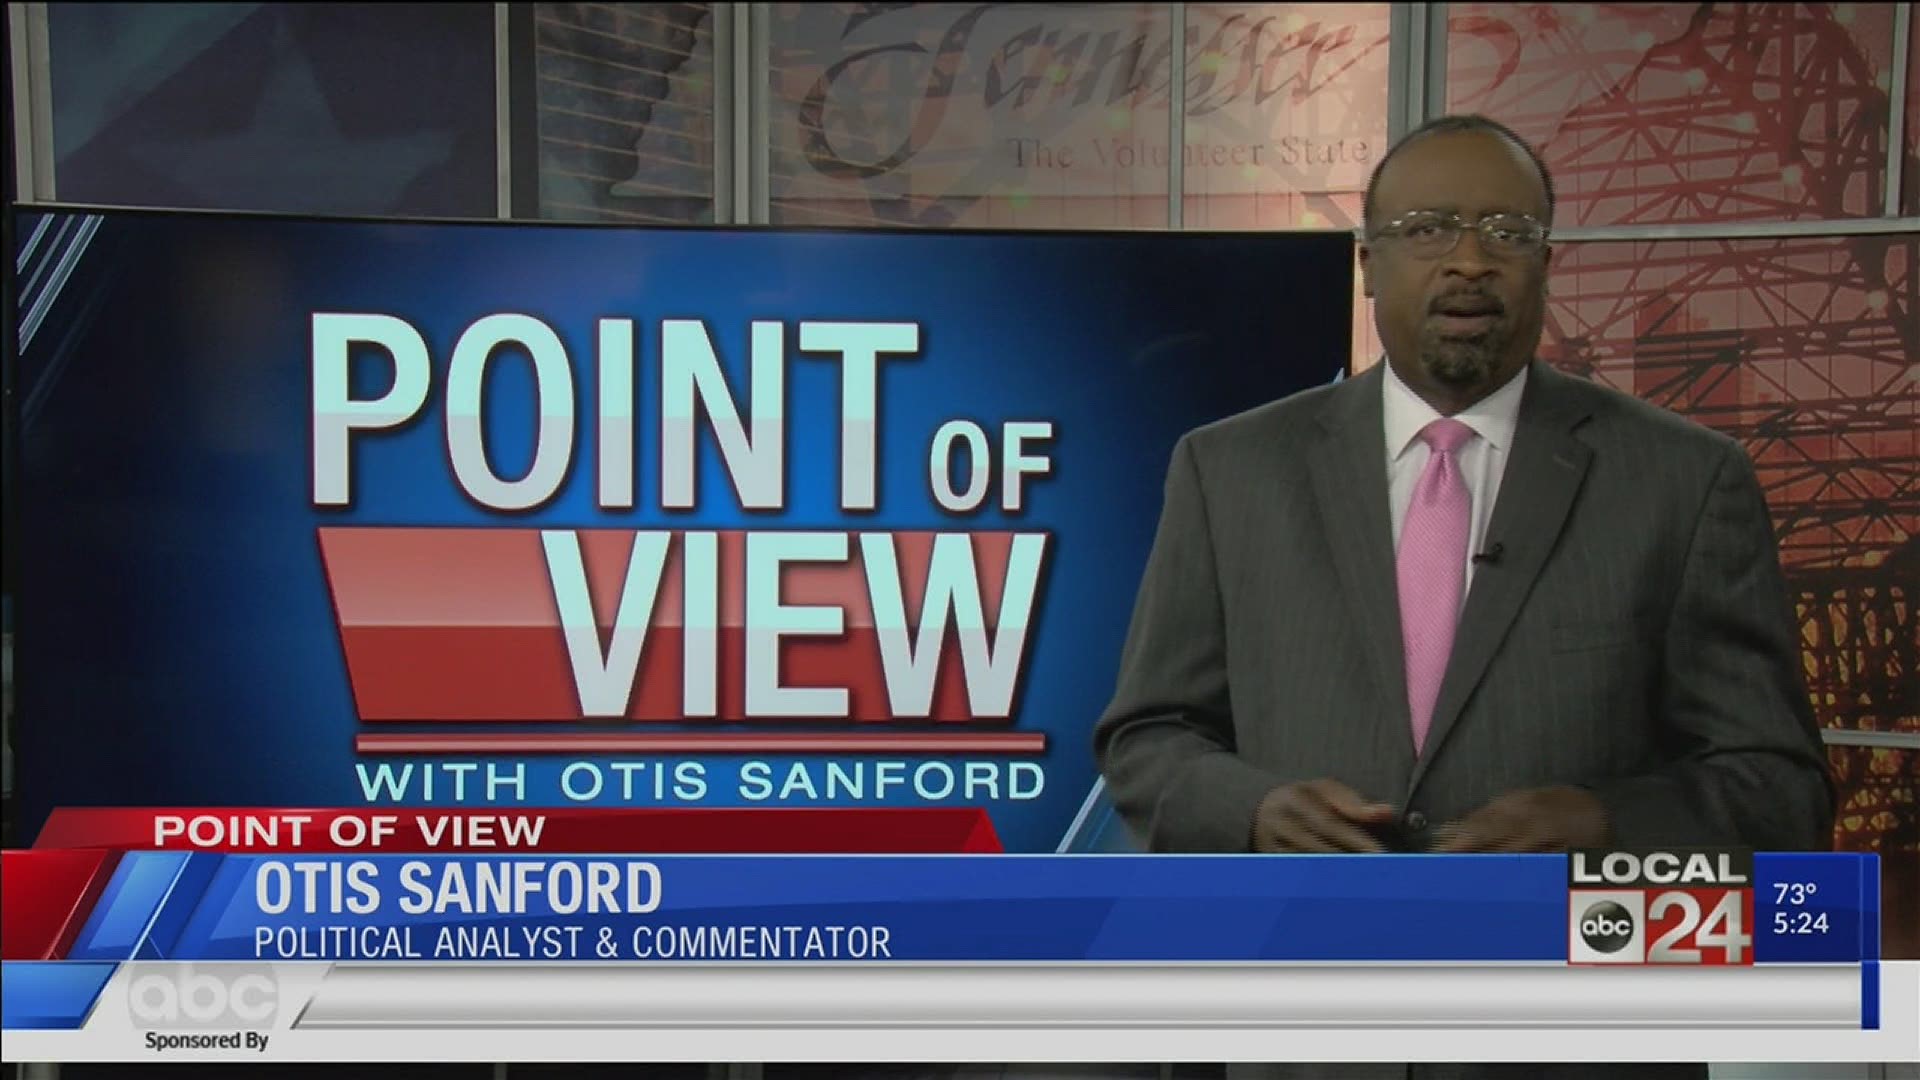 Local 24 News political analyst and commentator Otis Sanford shares his point of view on an ad controversy at the Tennessean in Nashville.